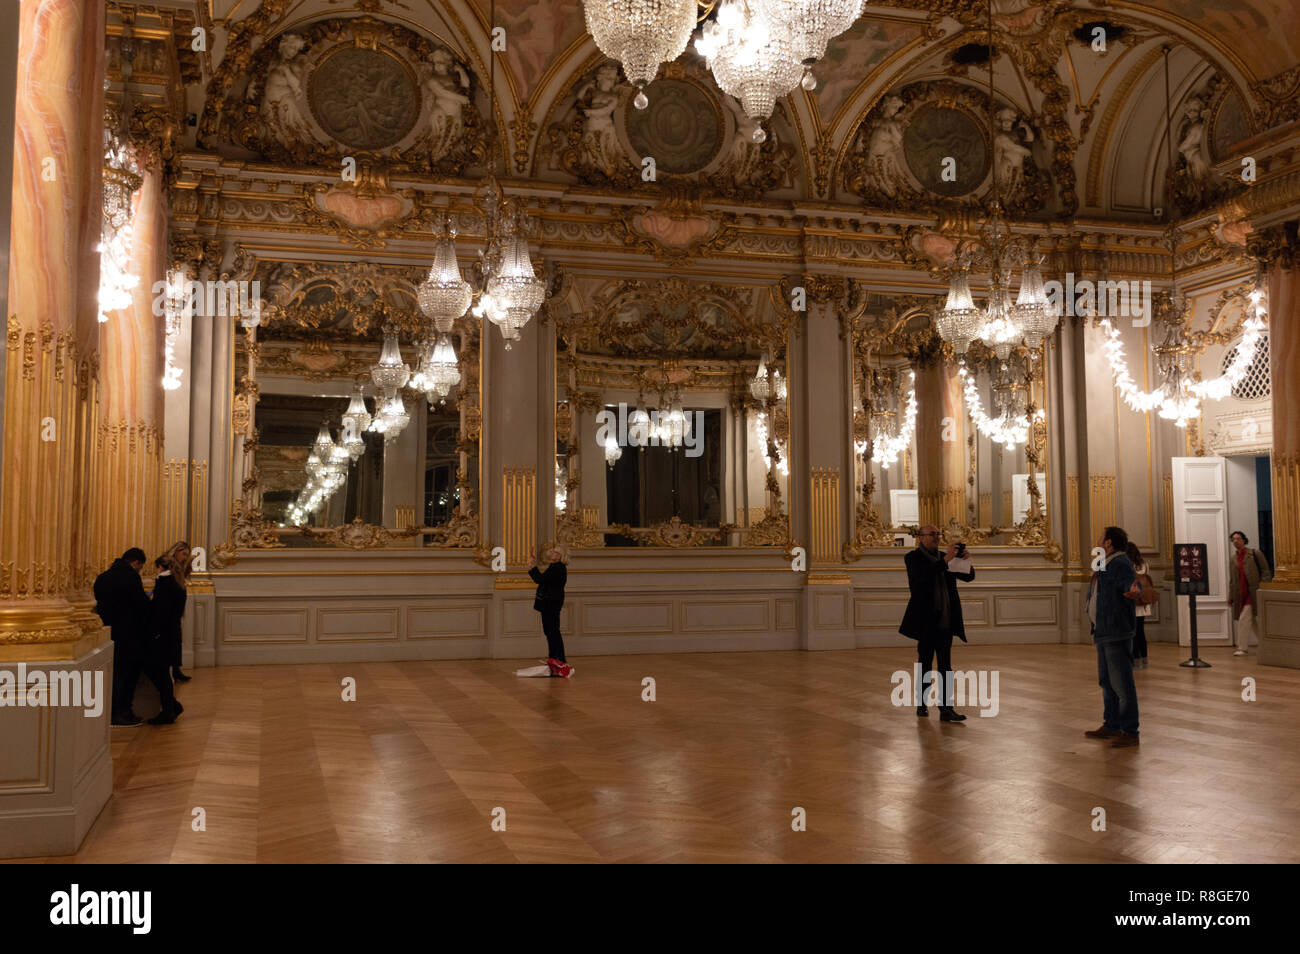 One of the most unexpected areas in the now museum, the ballroom has not changed since it was part of a hotel that was inside the train station. Desig Stock Photo